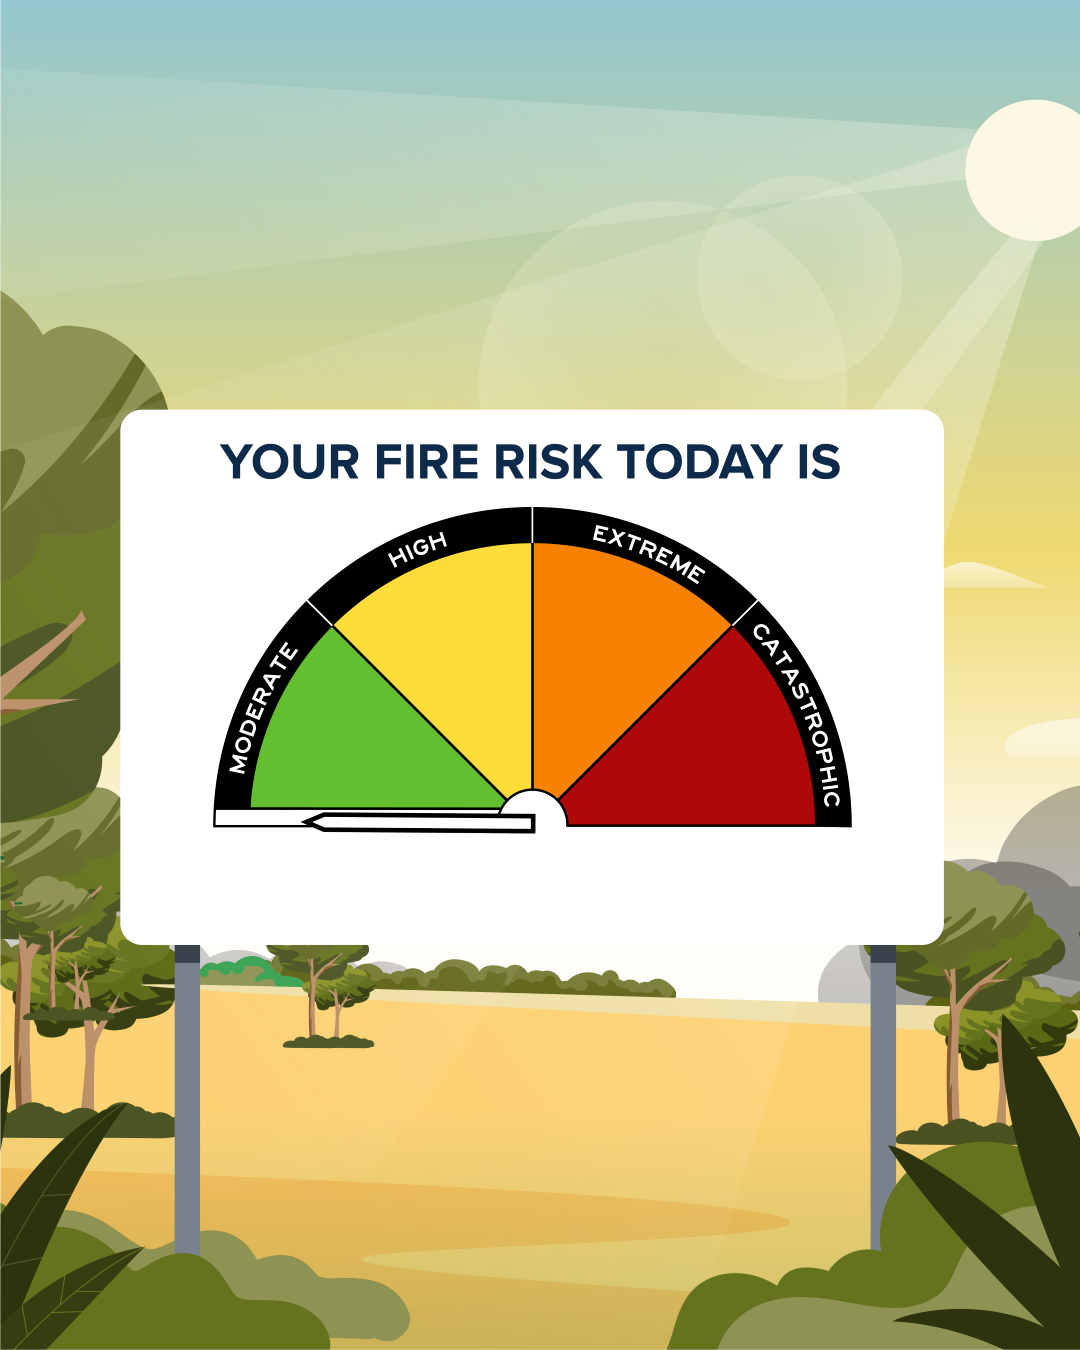 Fire Danger Rating scale showing that today has no rating